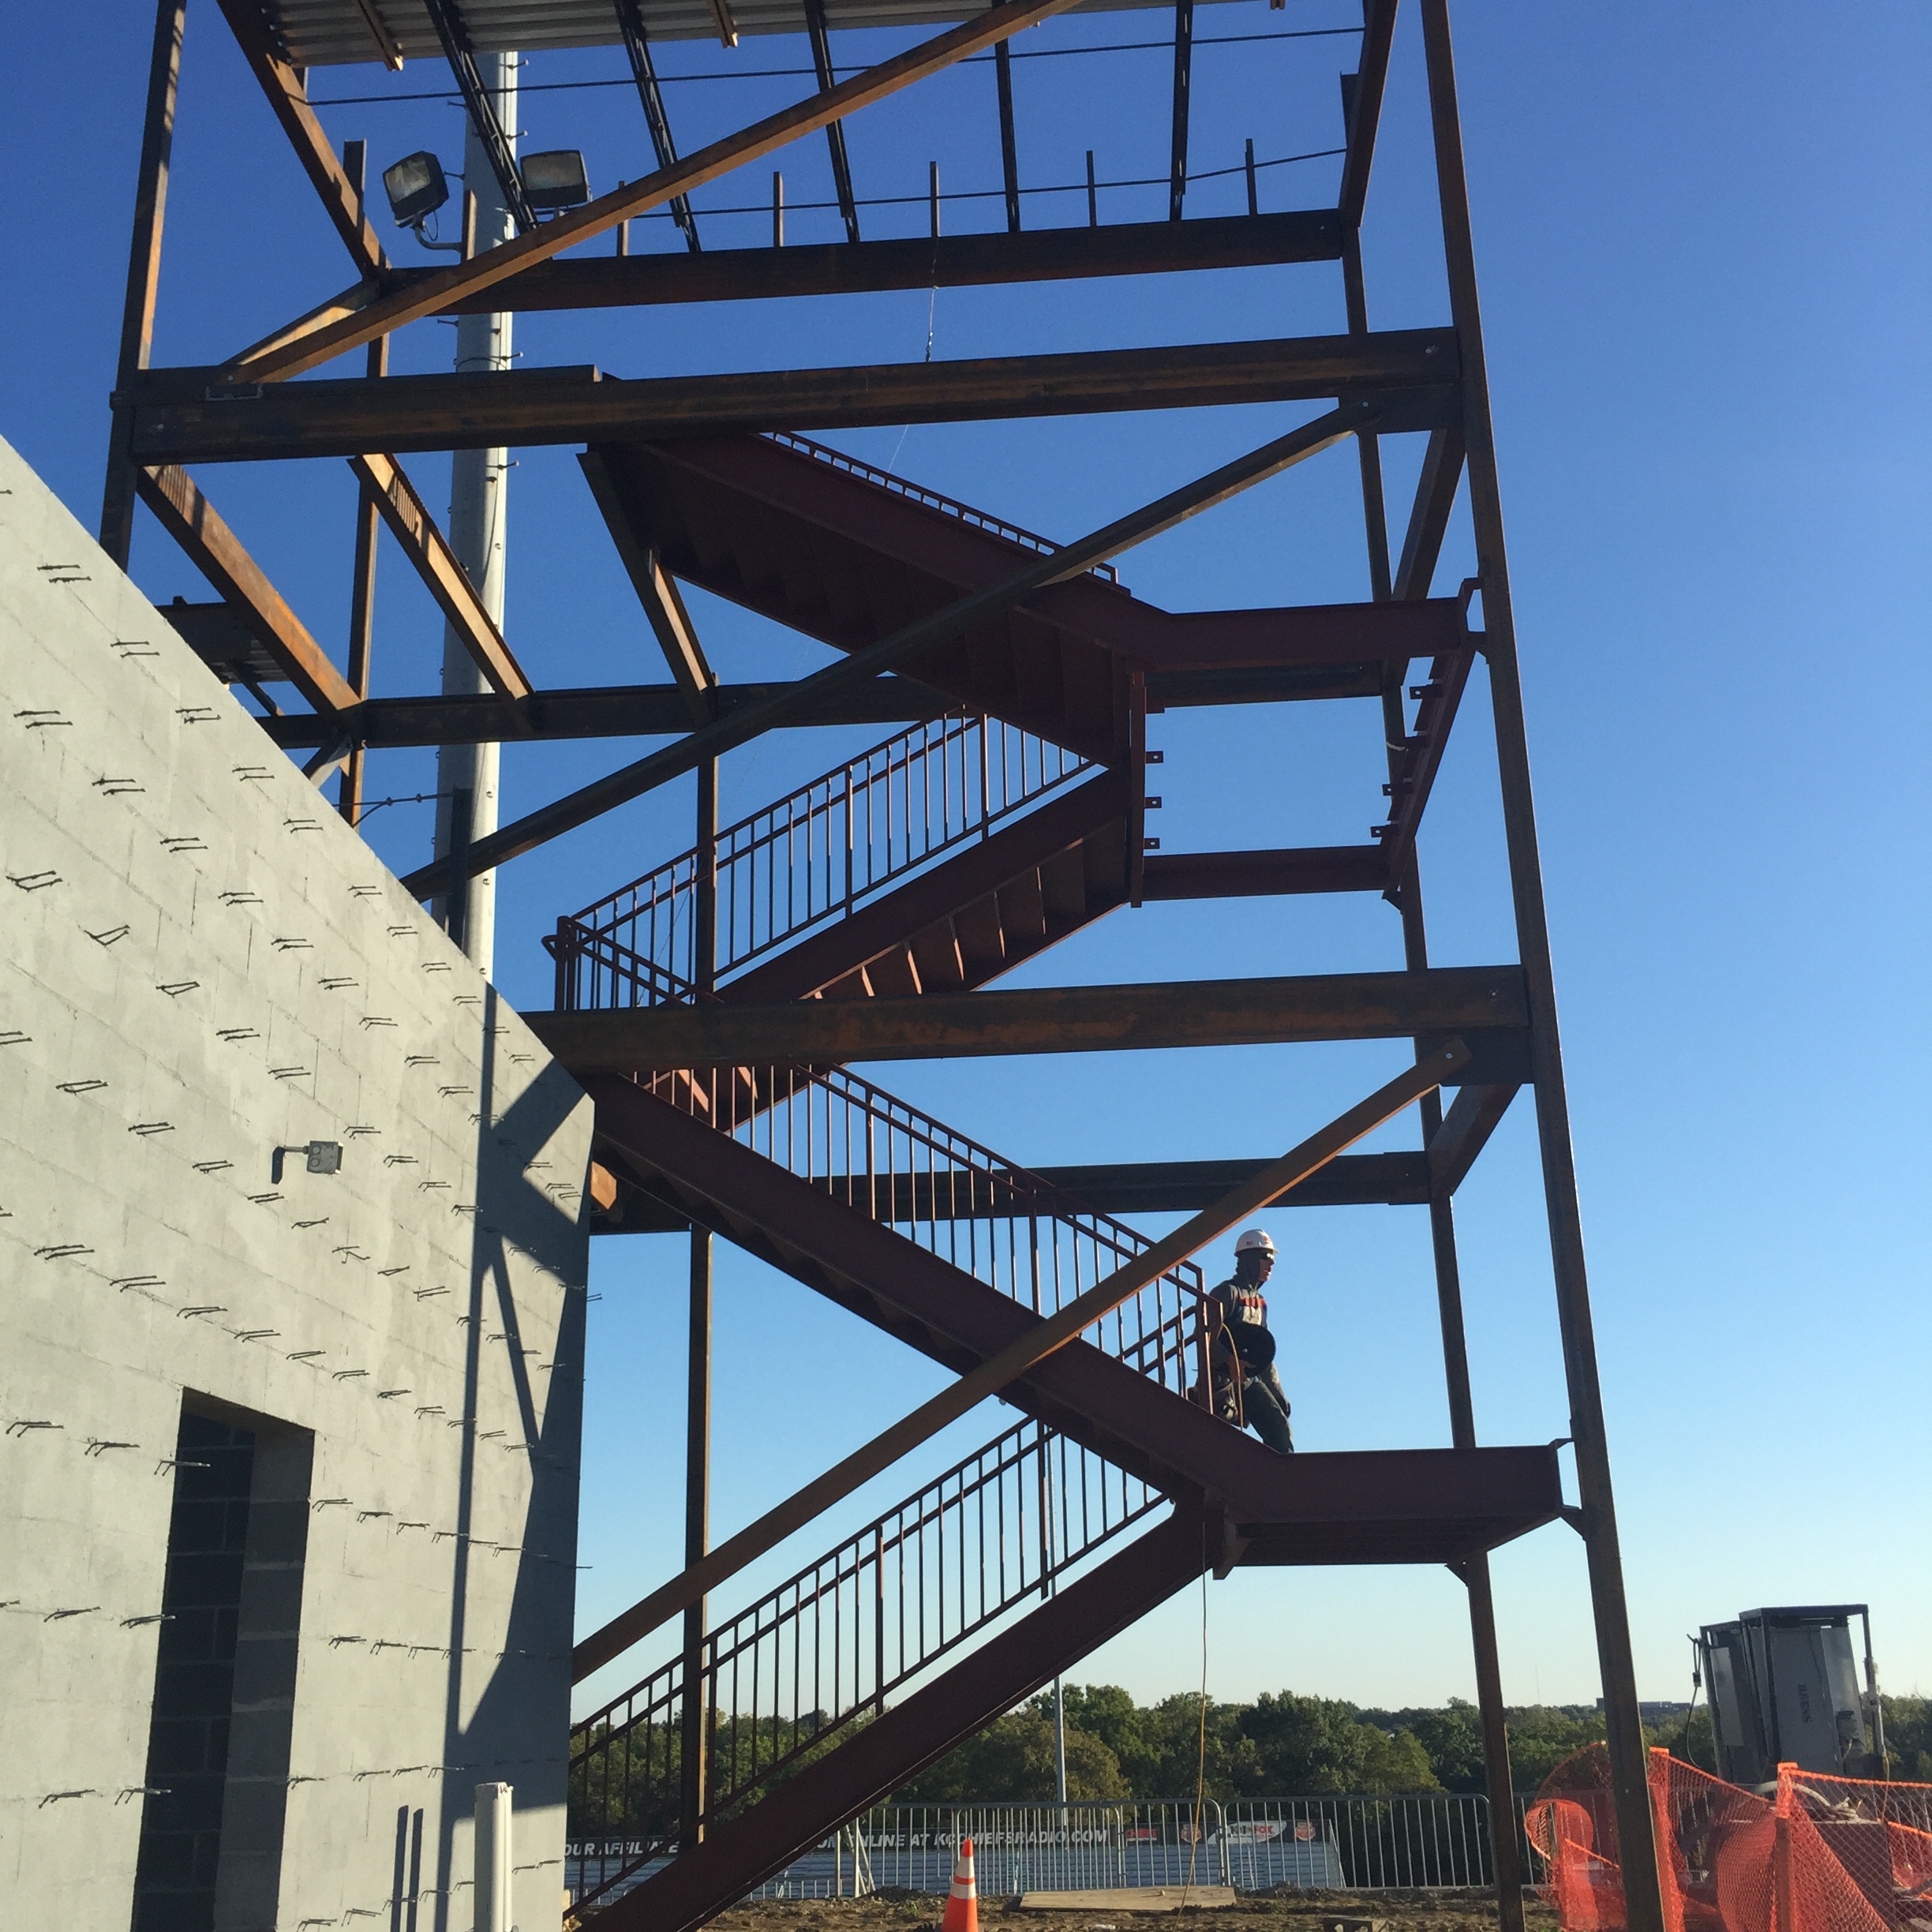 Industrial stairs require the highest safety standards, and structural steel holds up.